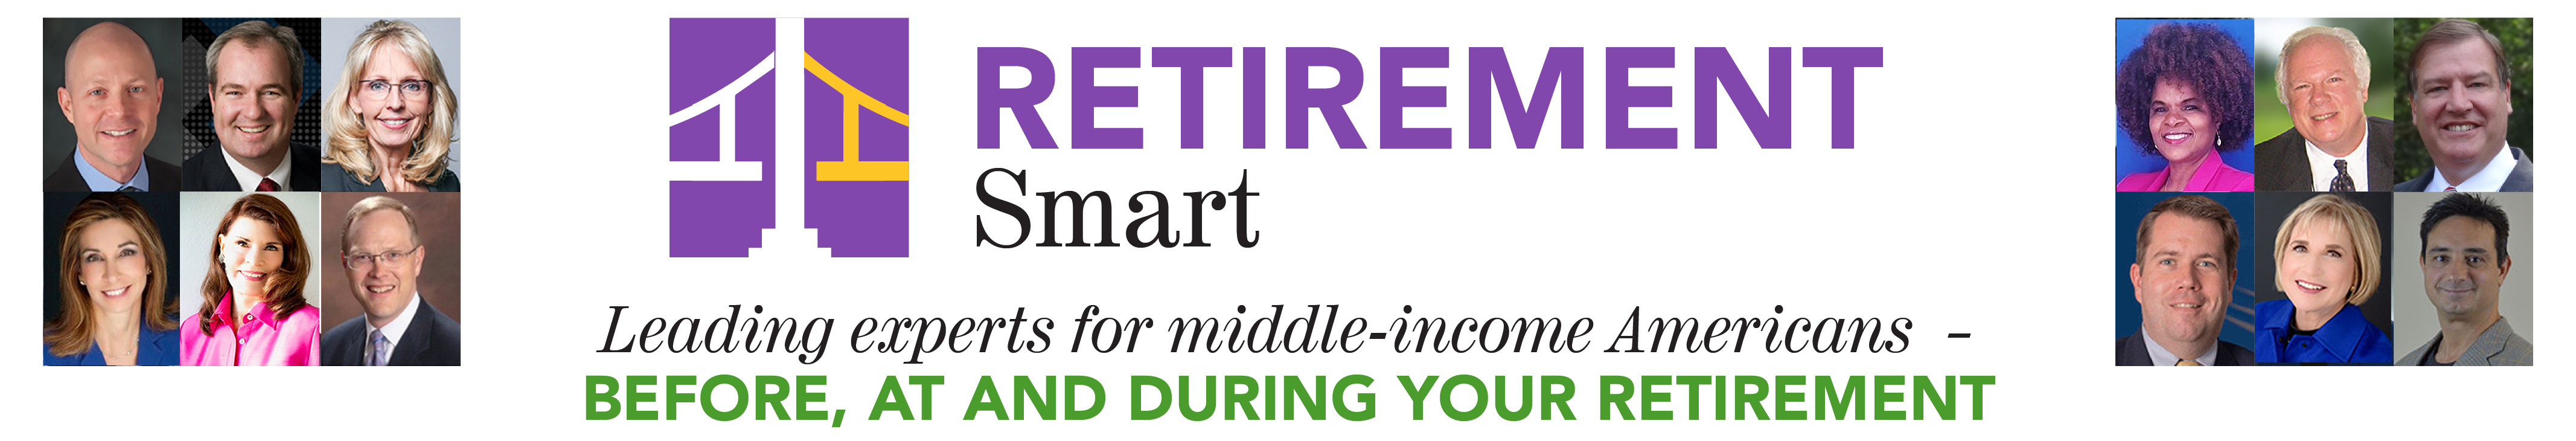 Retirement Smart for Consumers, Employees, Clients